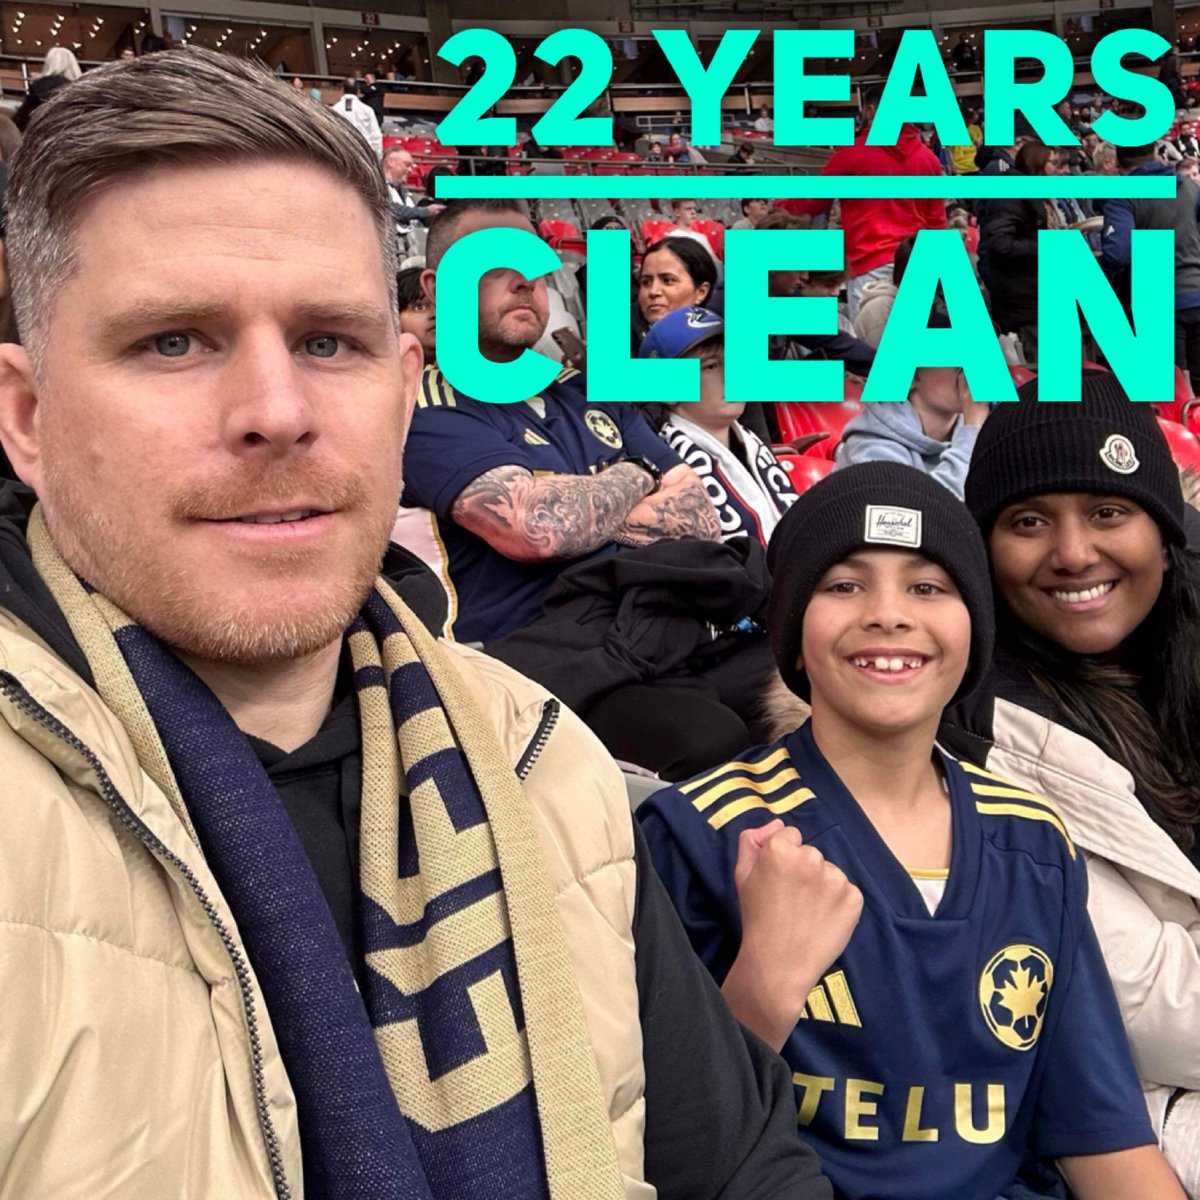 Youth Program Alumni living the dream 22 years later. Congratulations Alumni Dam on all your successes with family, life, work, and recovery. #WeDoRecover